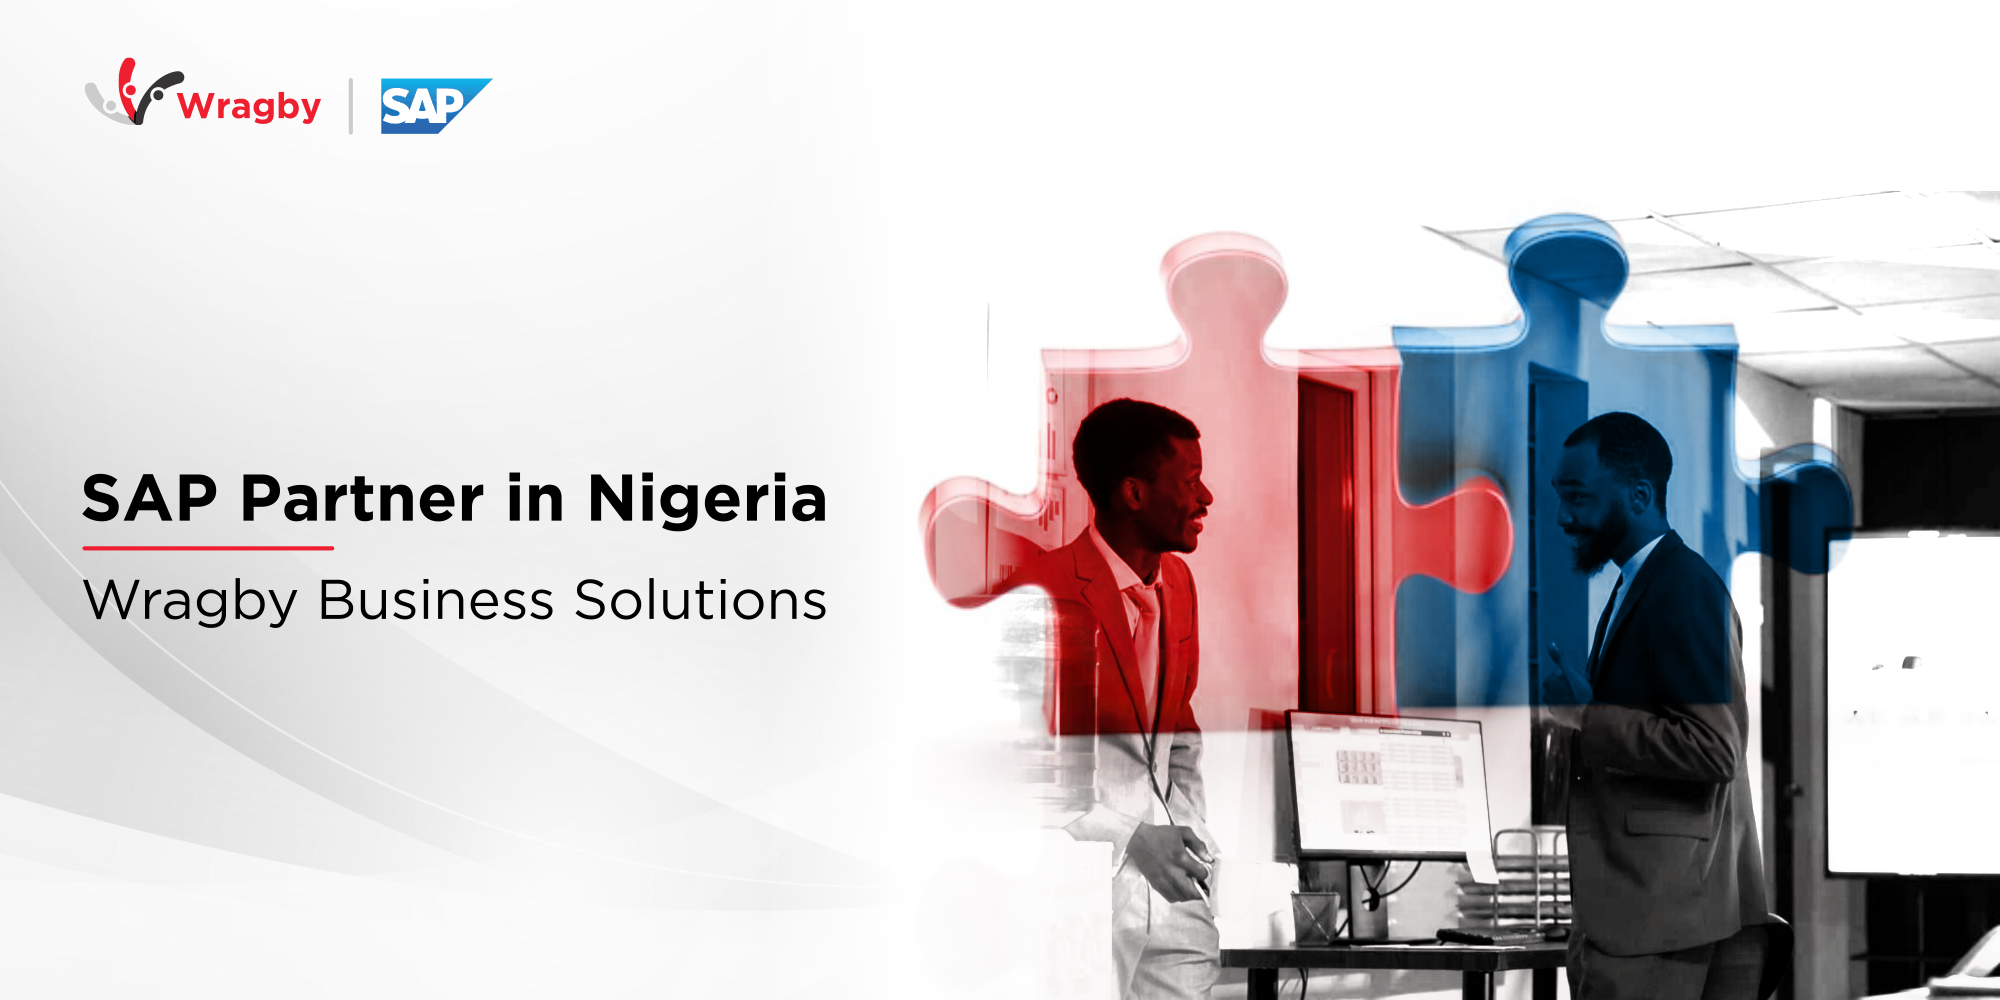 SAP Partner in Nigeria - Wragby Business Solutions